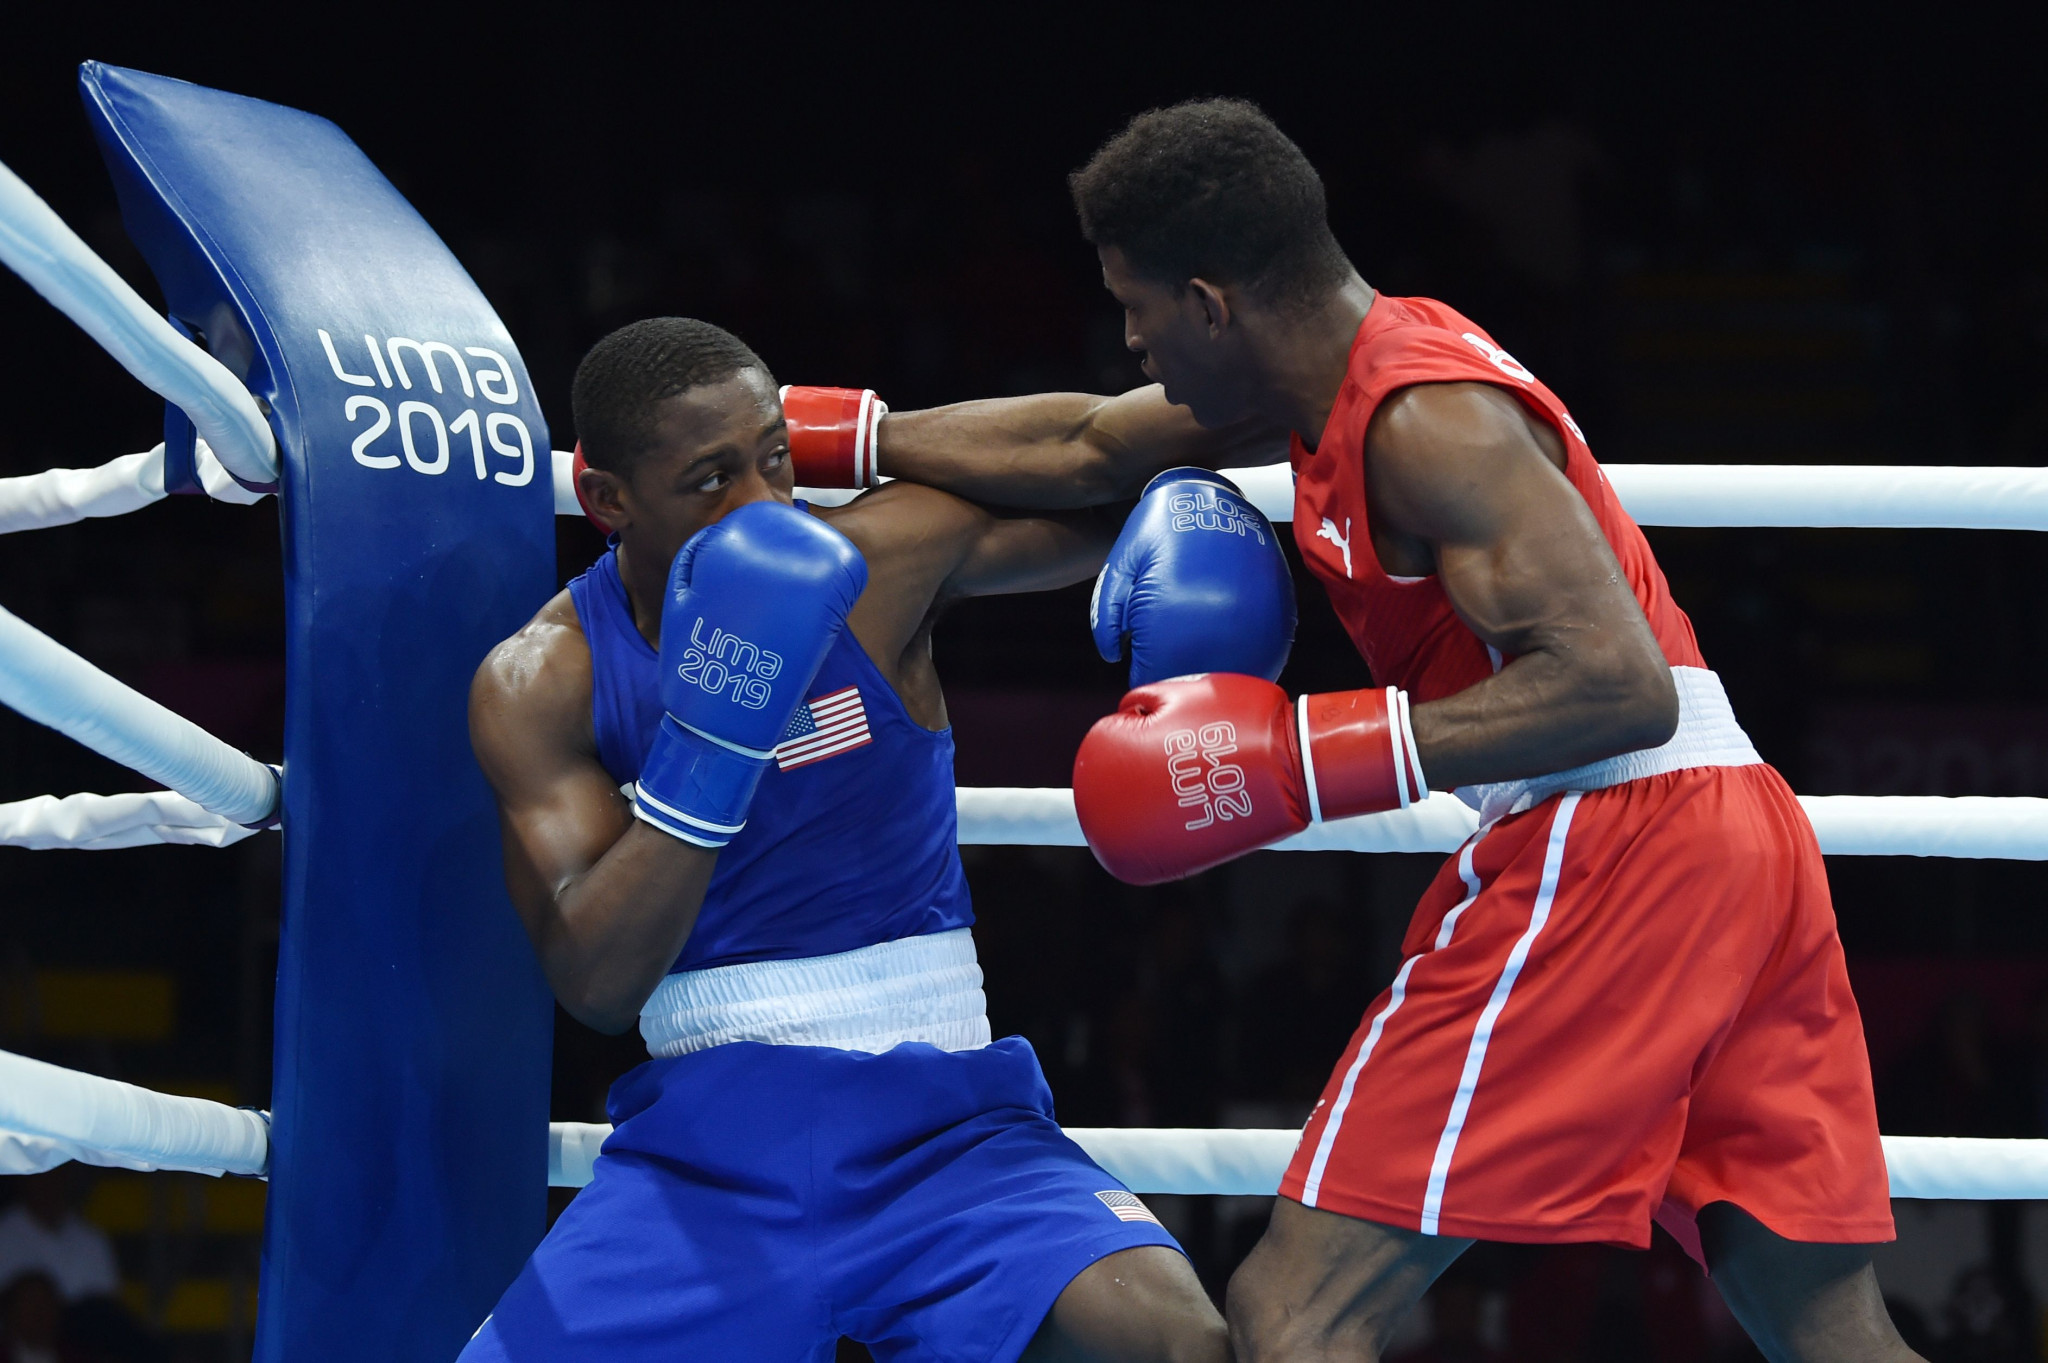 American boxer Keyshawn Davis lost to Cuba's two-time world champion Andy Cruz in both the 2019 World Boxing Championship and Pan American Games finals ©Getty Images